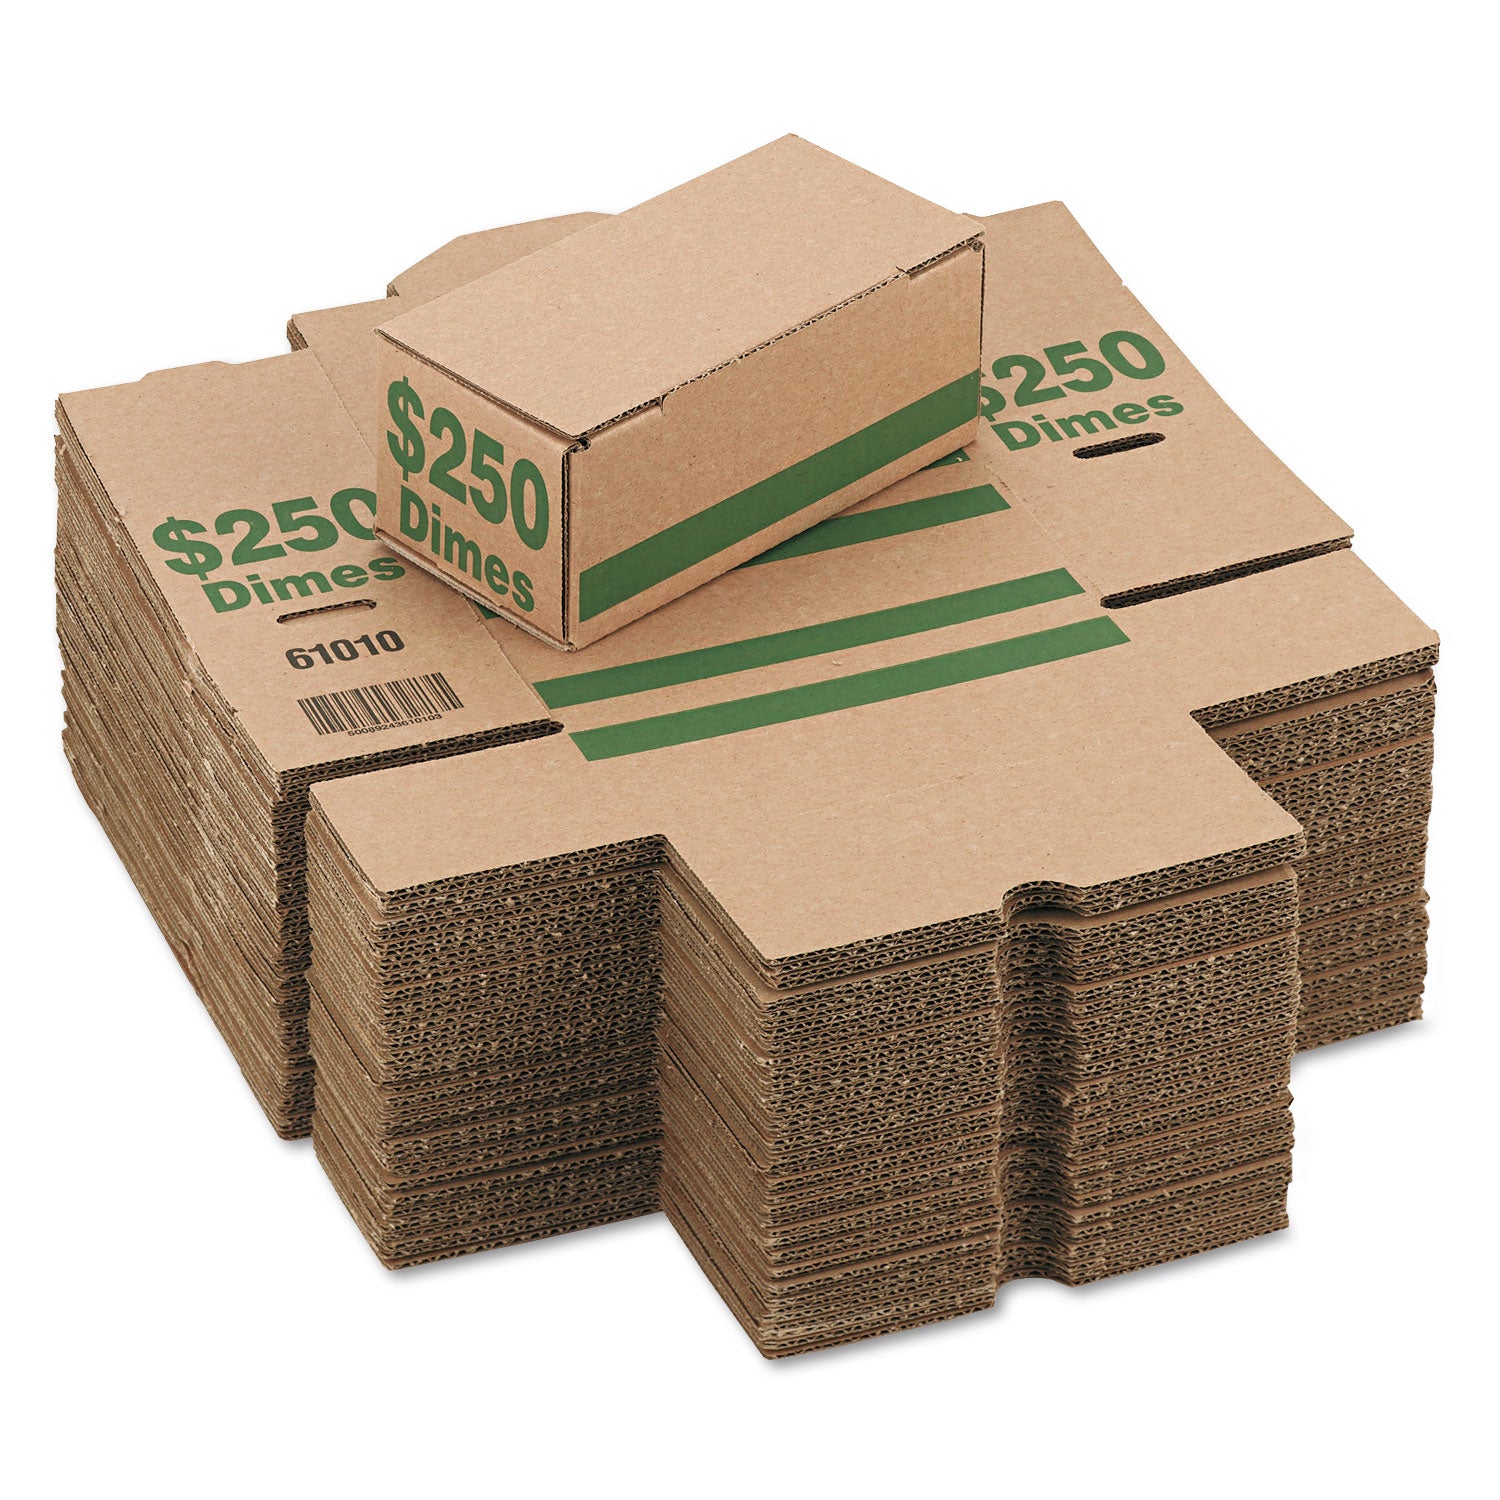 corrugated-cardboard-coin-storage-with-denomination-printed-on-side-806-x-331-x-319-green_icx94190088 - 2